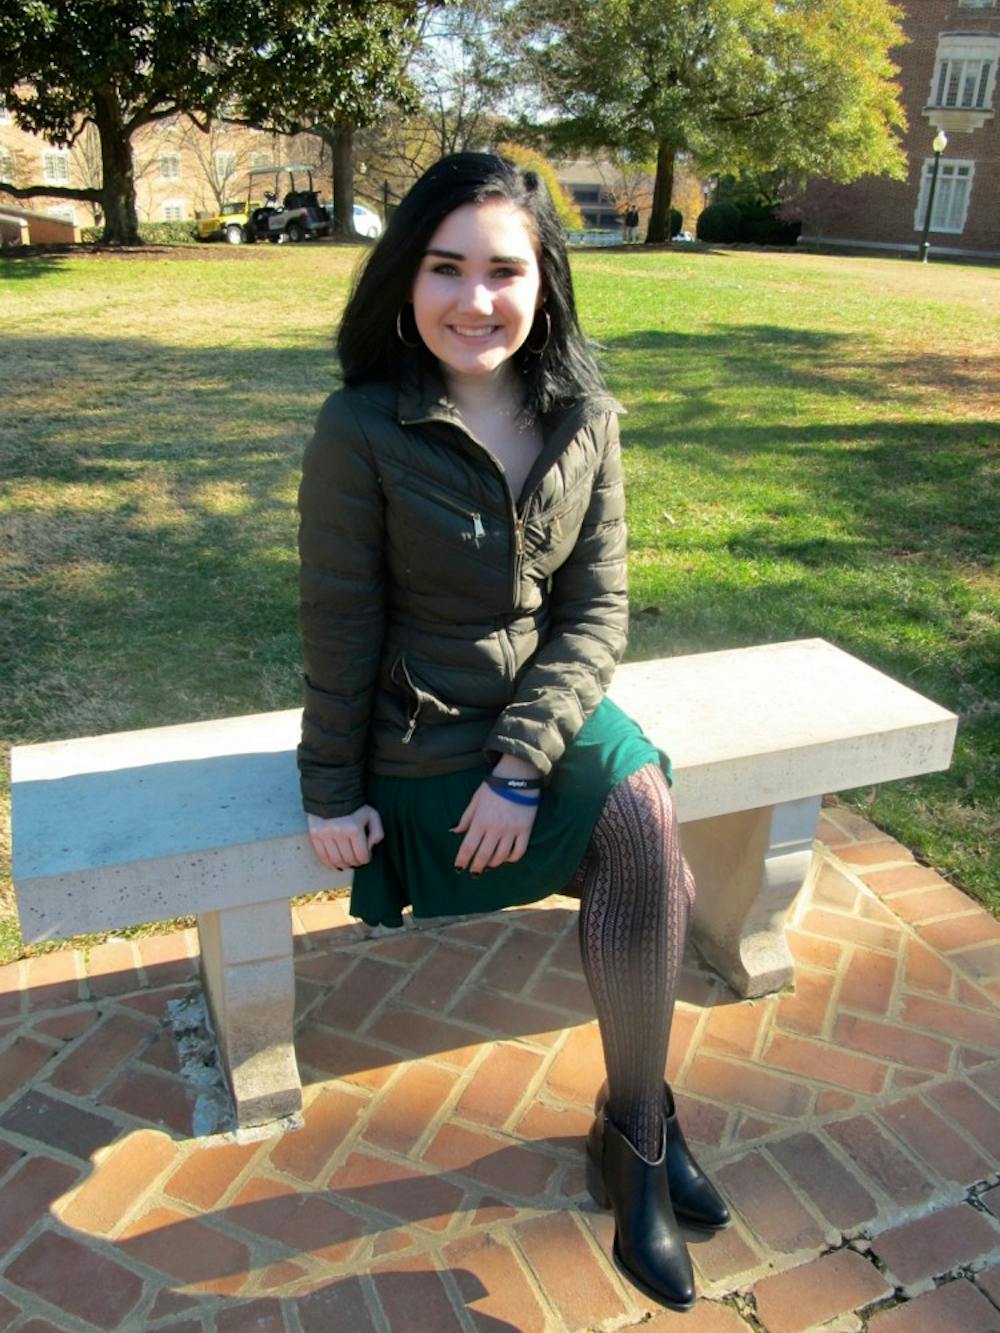 <p>Freshman Hayley Durudogan has started Spiders for Spiders, a movement focused on preventing campus sexual violence through education and awareness. Photo by Ellen Oh.</p>